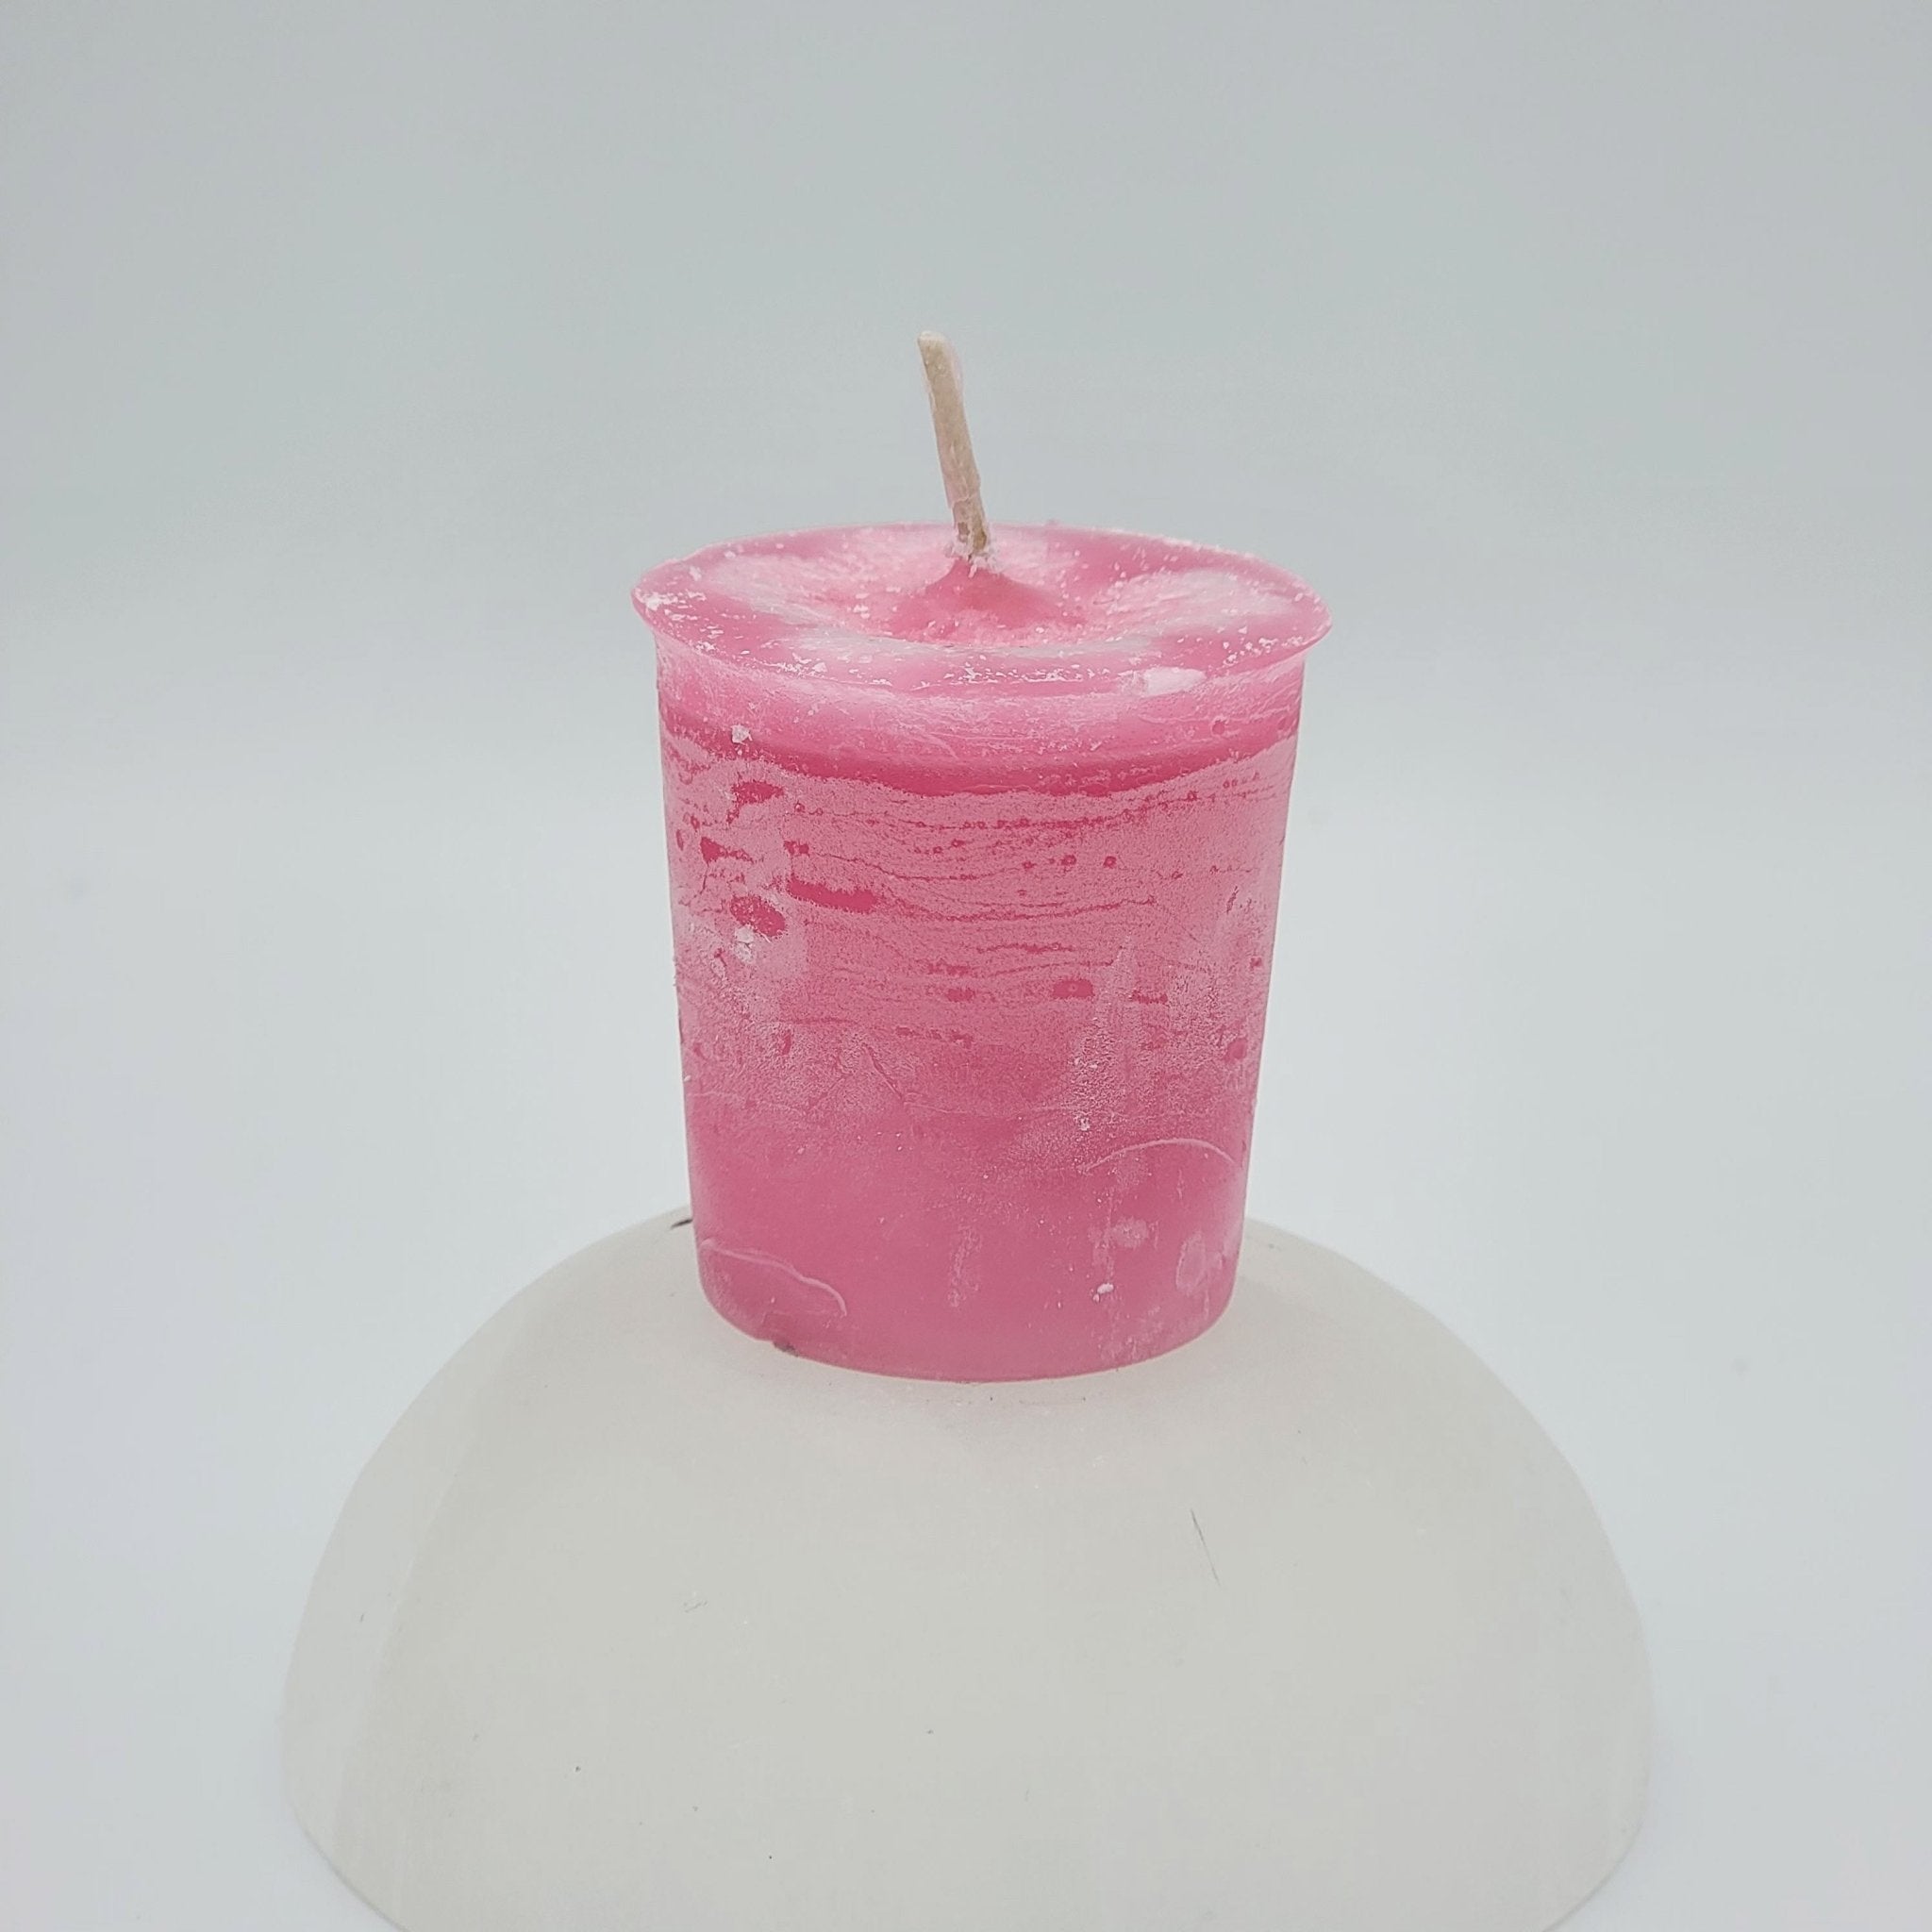 Manifest a Miracle | Pastel Pink | Votive Intention Candle | Reiki Charged - Spiral Circle